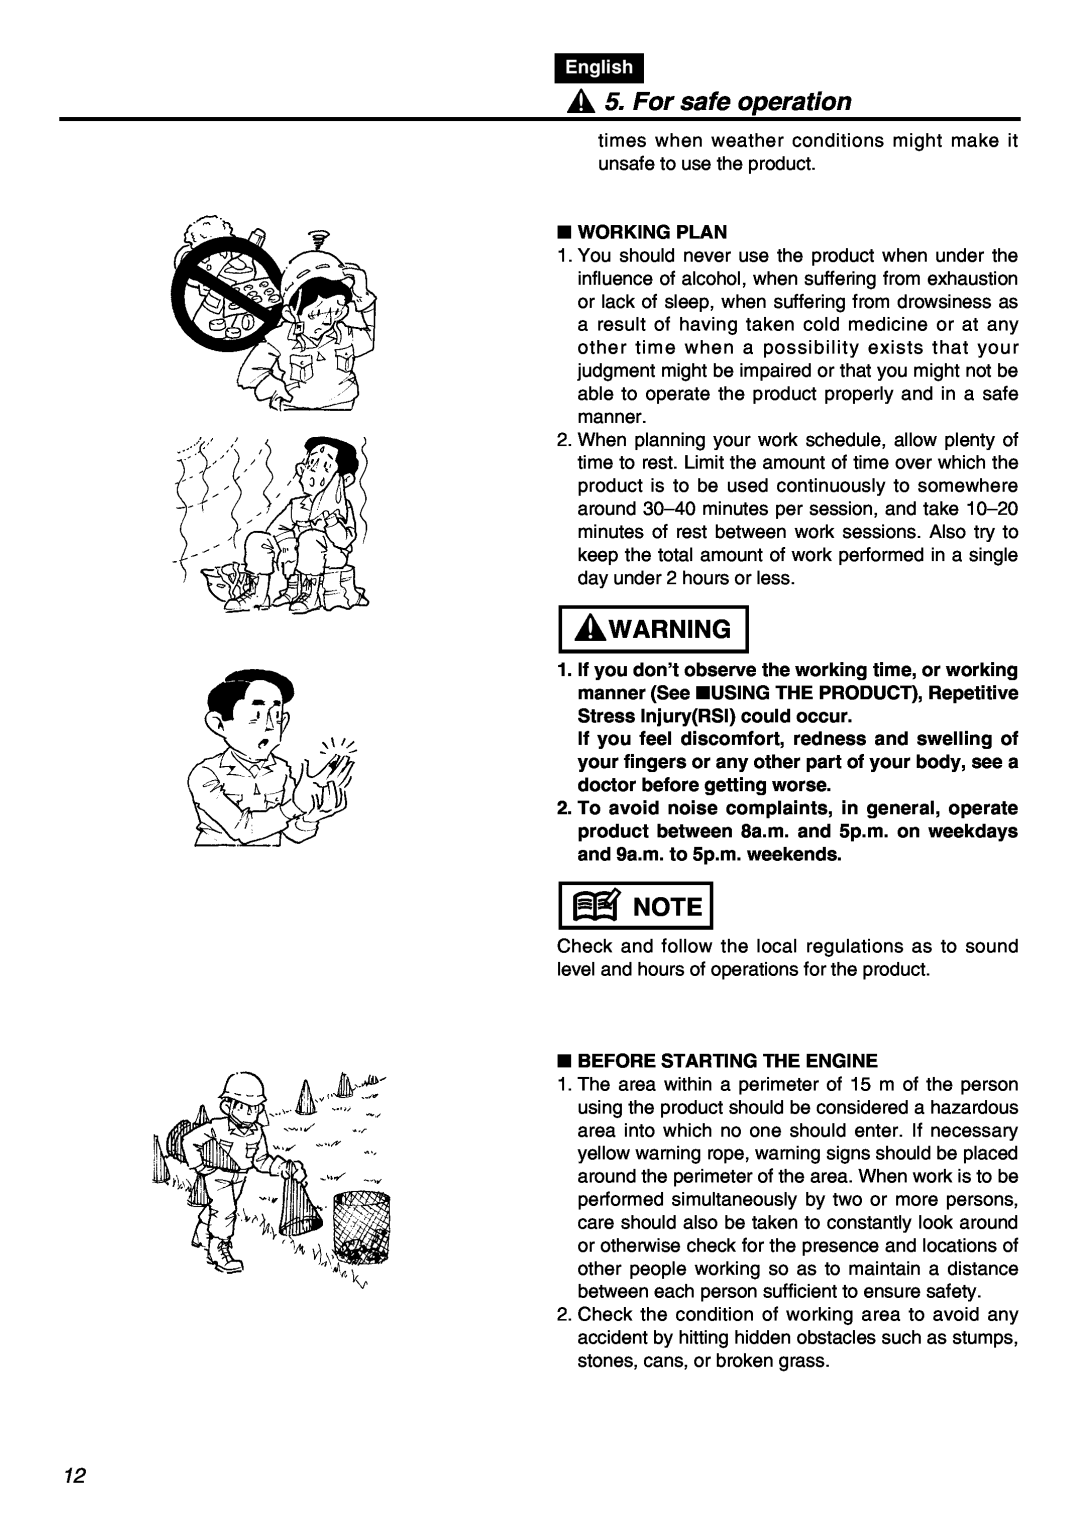 Univex SRTZ2401 manual For safe operation, English, Working Plan, Stress InjuryRSI could occur, Before Starting The Engine 